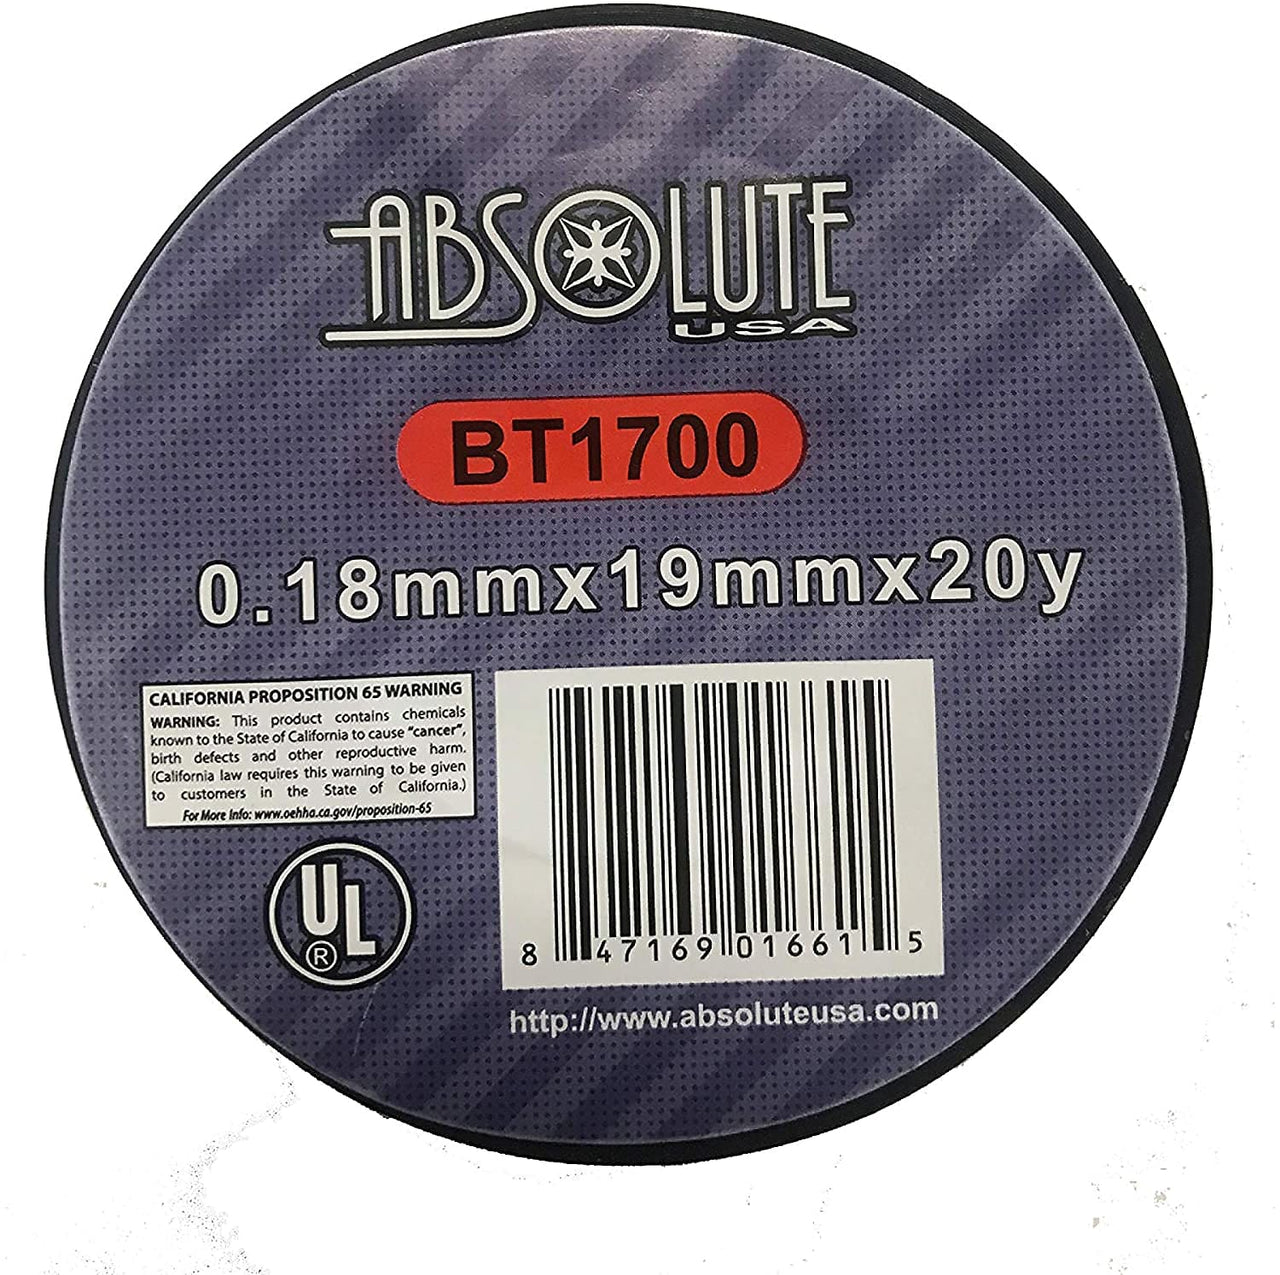 Absolute BT1700 3M Quality General Use 0.18mm x 3/4" x 20 Yard Electrical Vinyl Tape 3/4" x 60'